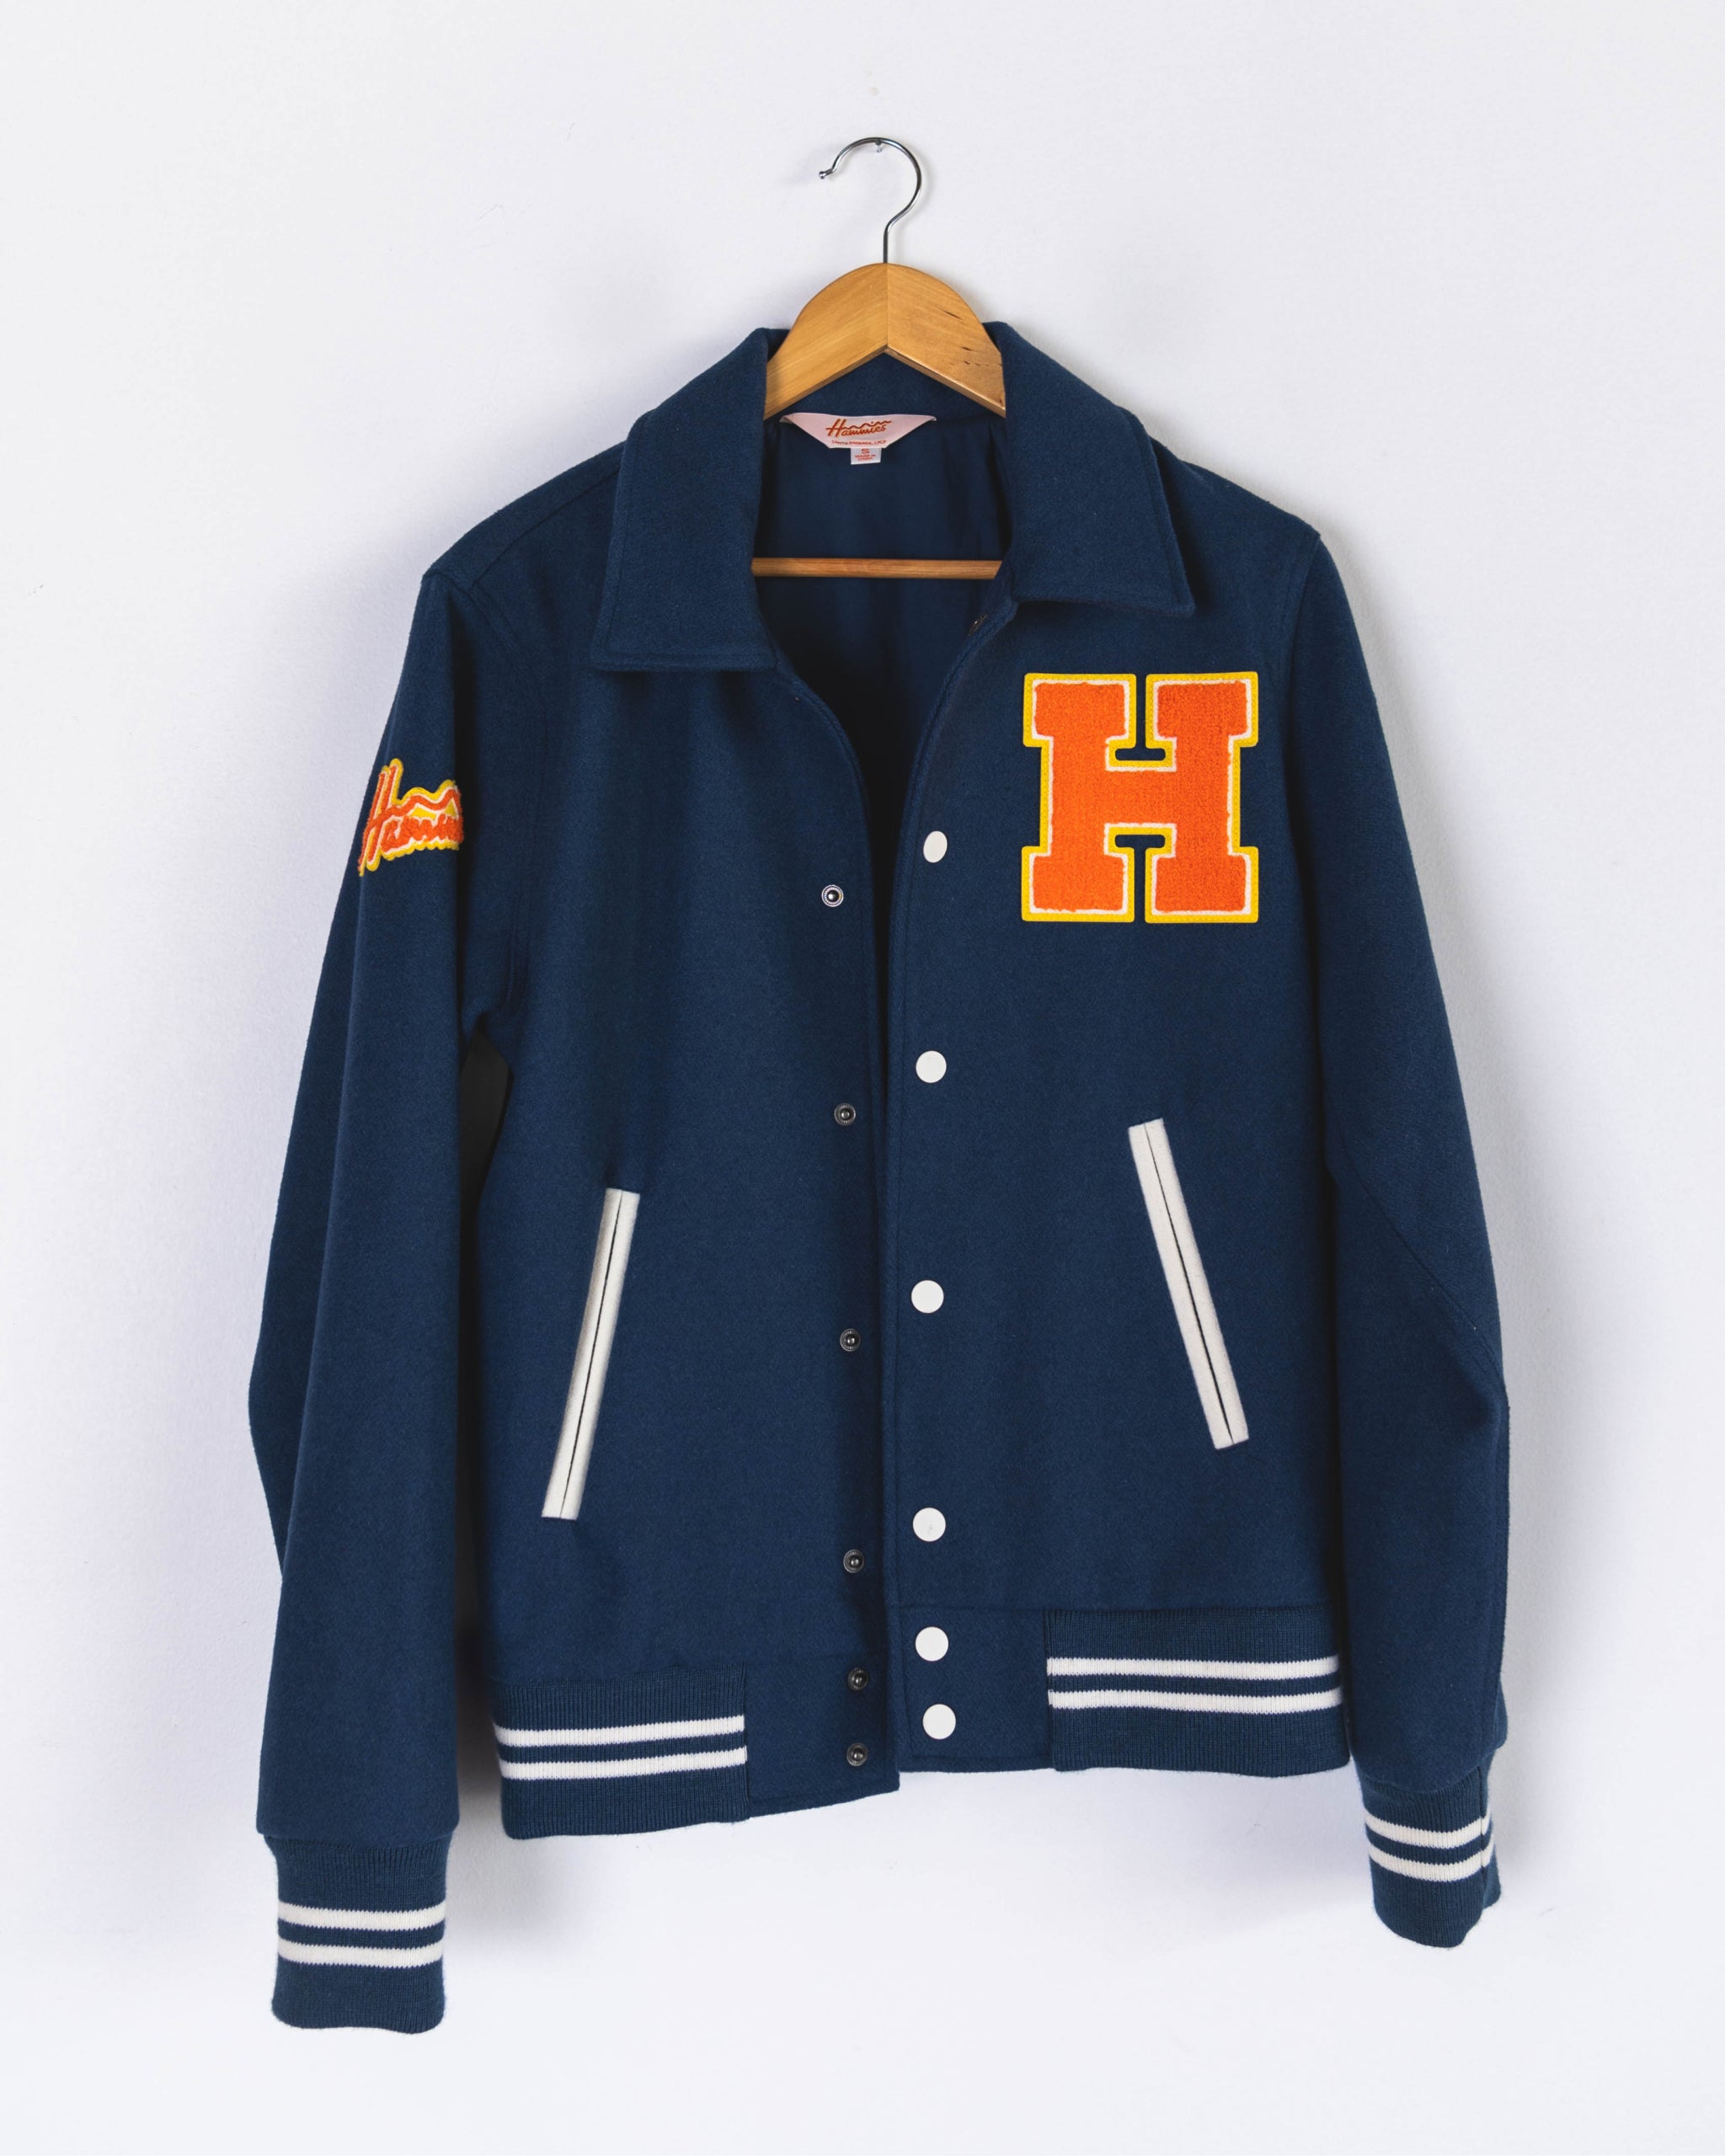 INSPI Varsity Jacket Navy Blue For Men and Women with Buttons and Pock